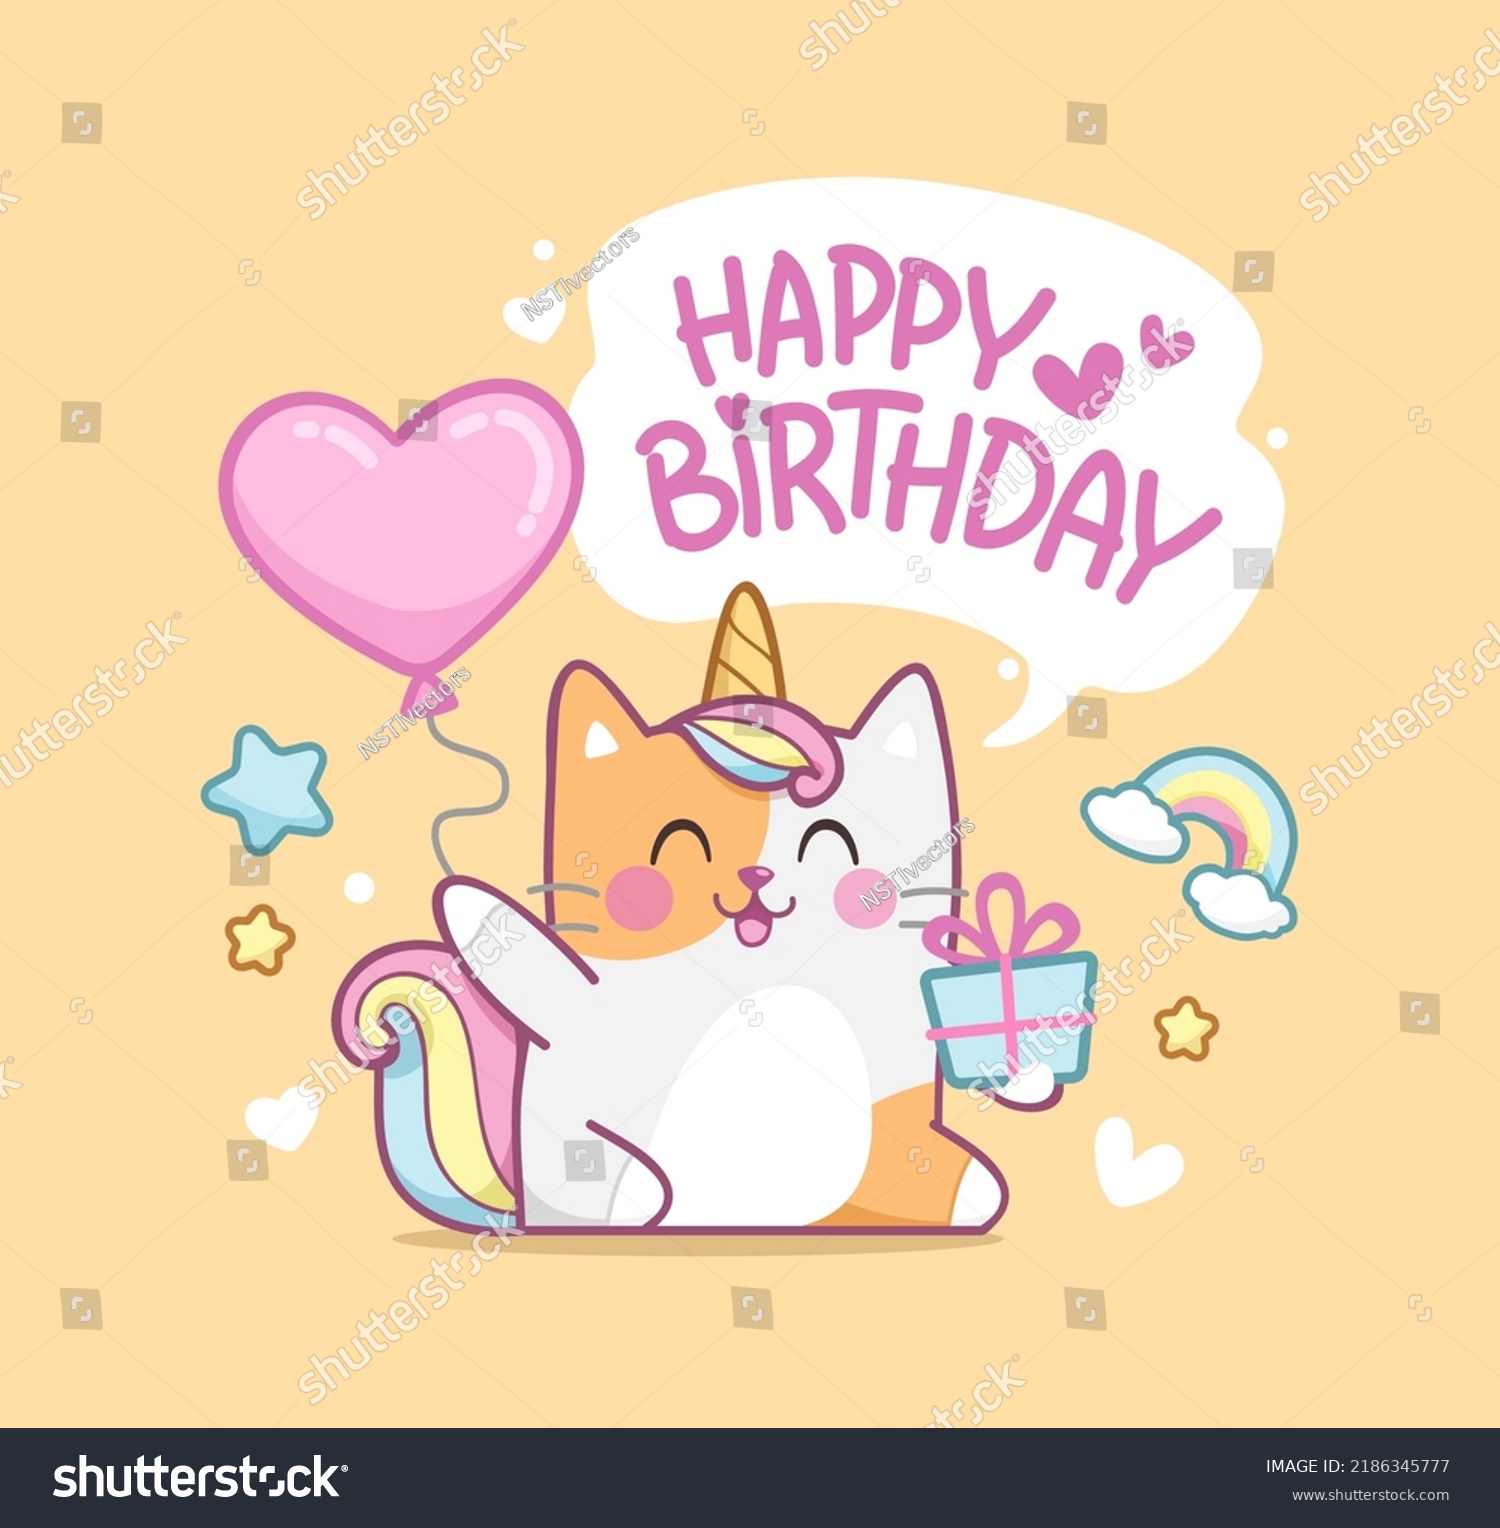 SVG of Cute baby Caticorn kitten or Cat Unicorn on happy birthday card template. Happy birthday card design with cute kawaii kitten. Unicorn cat with congratulations and a gift box in hand svg